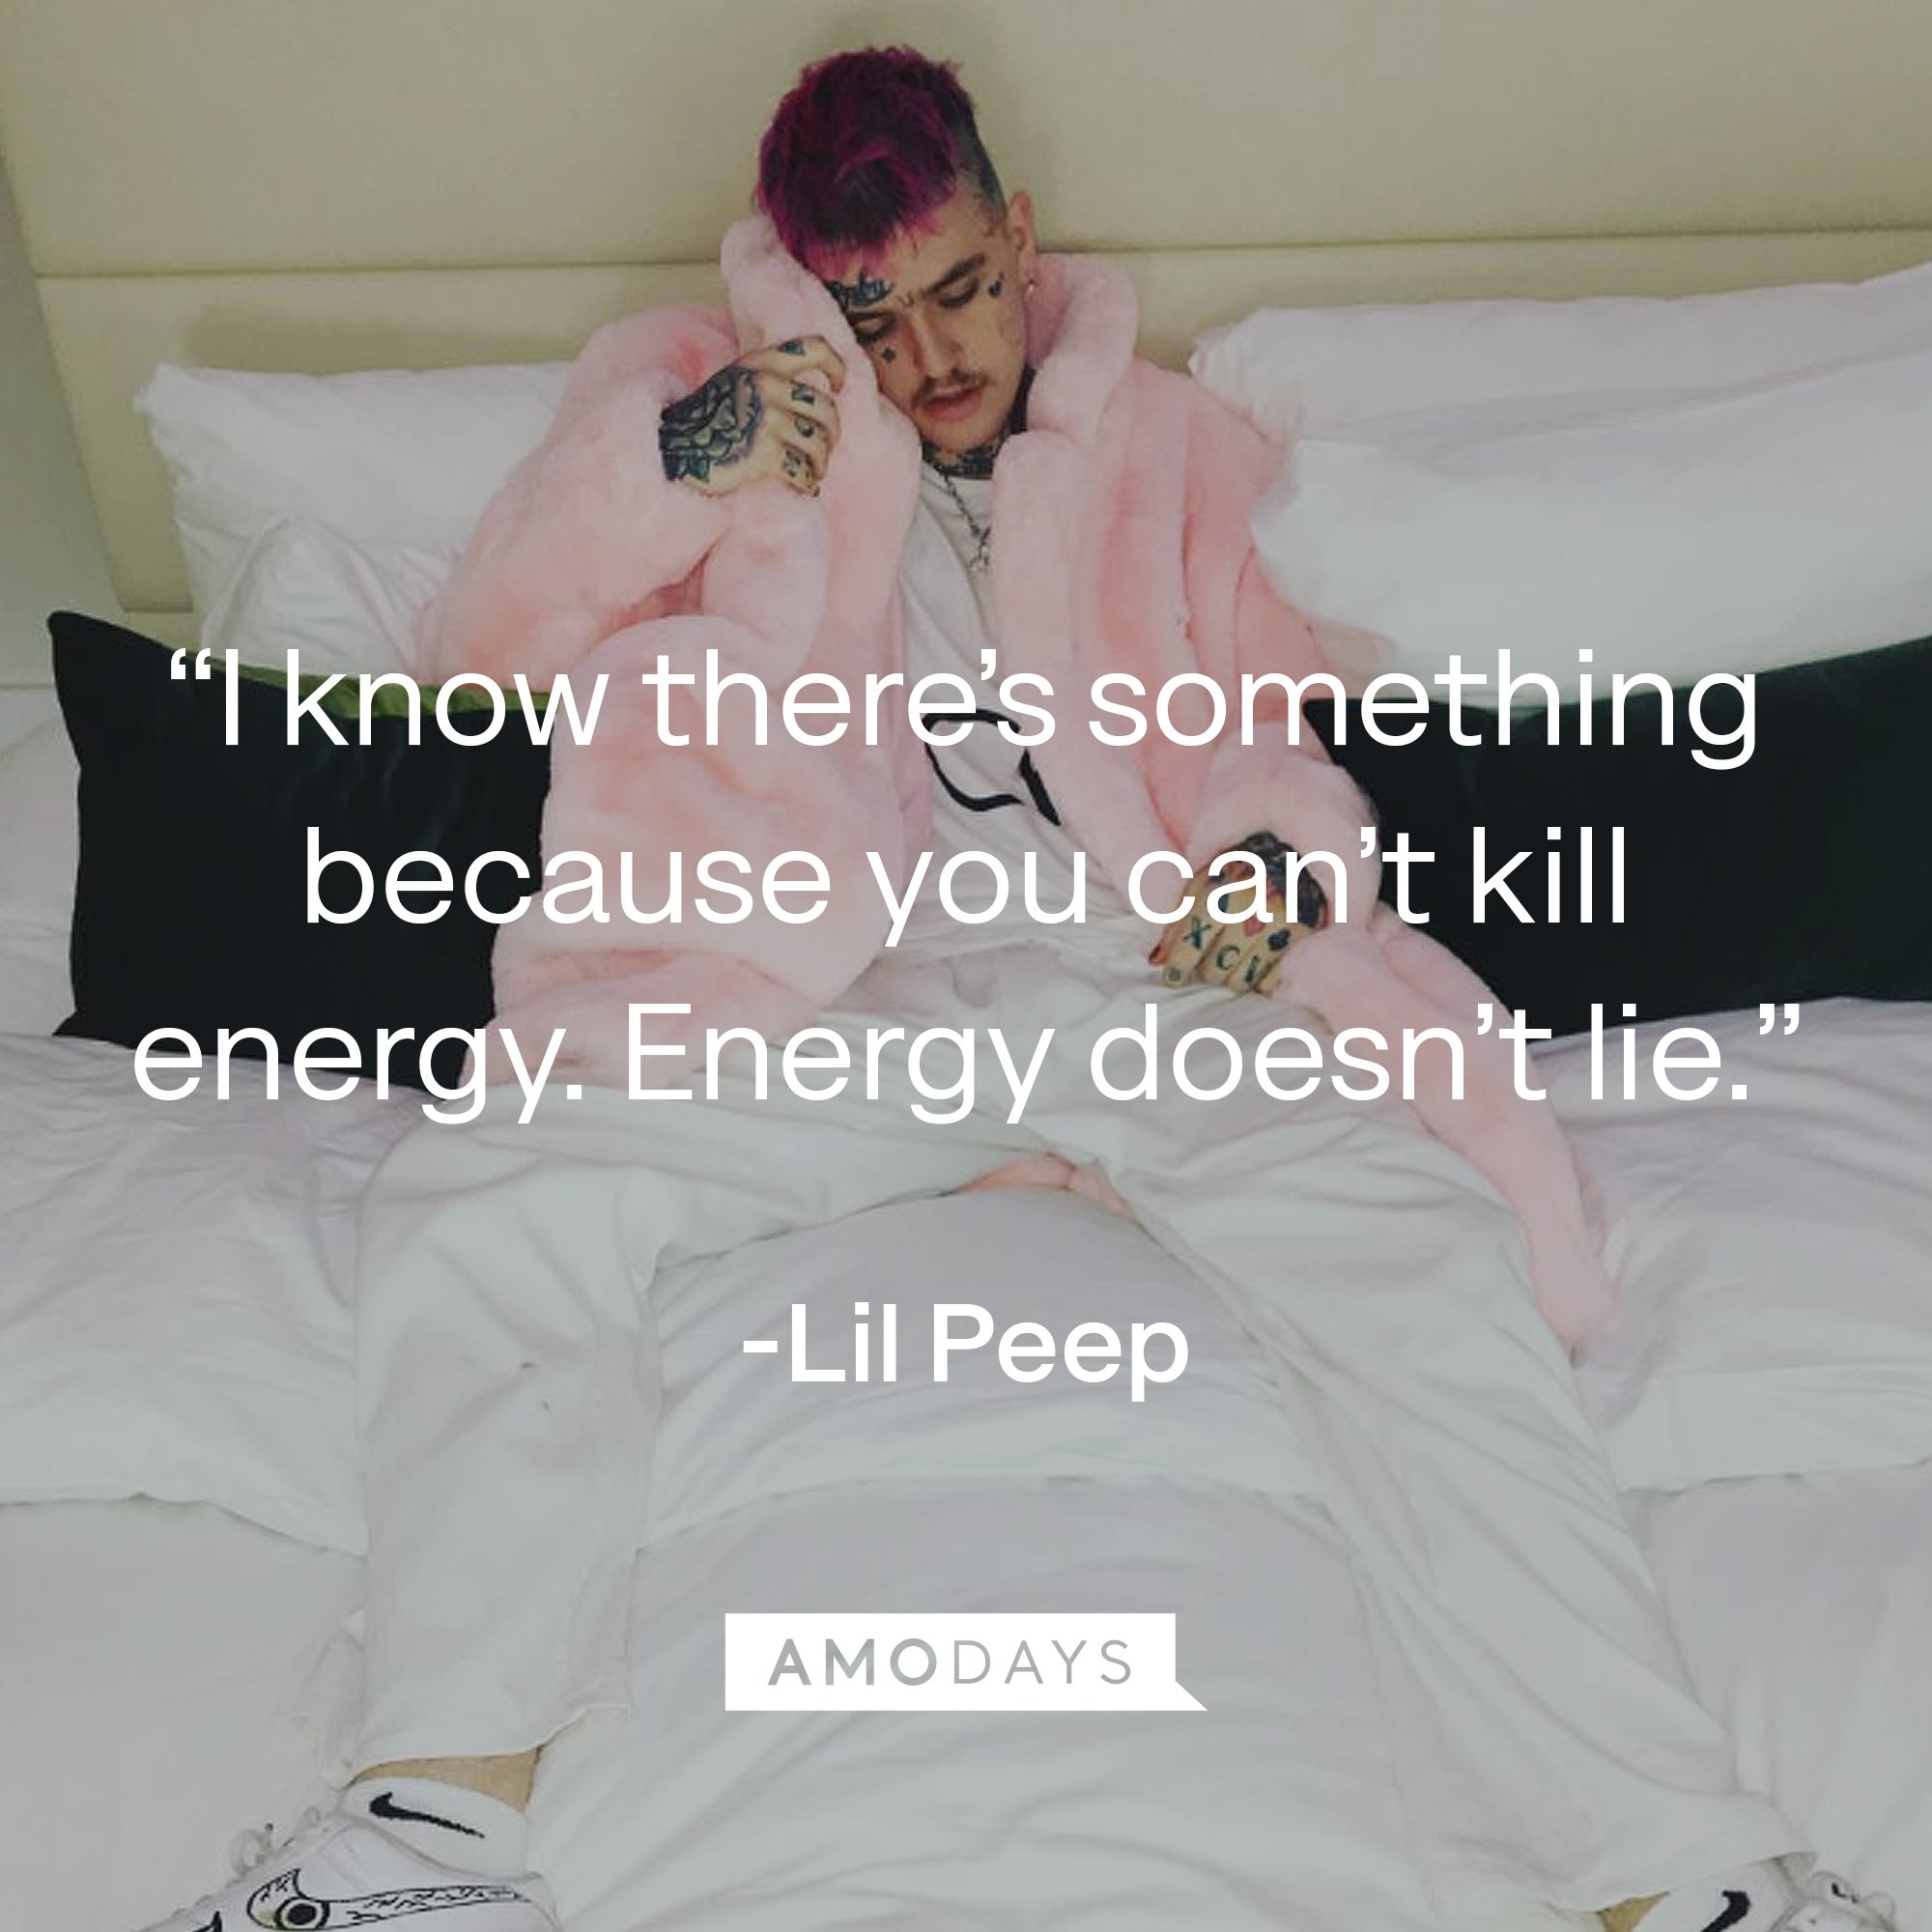 Lil Peep's quote: “I know there’s something because you can’t kill energy. Energy doesn’t lie.” | Image: AmoDays